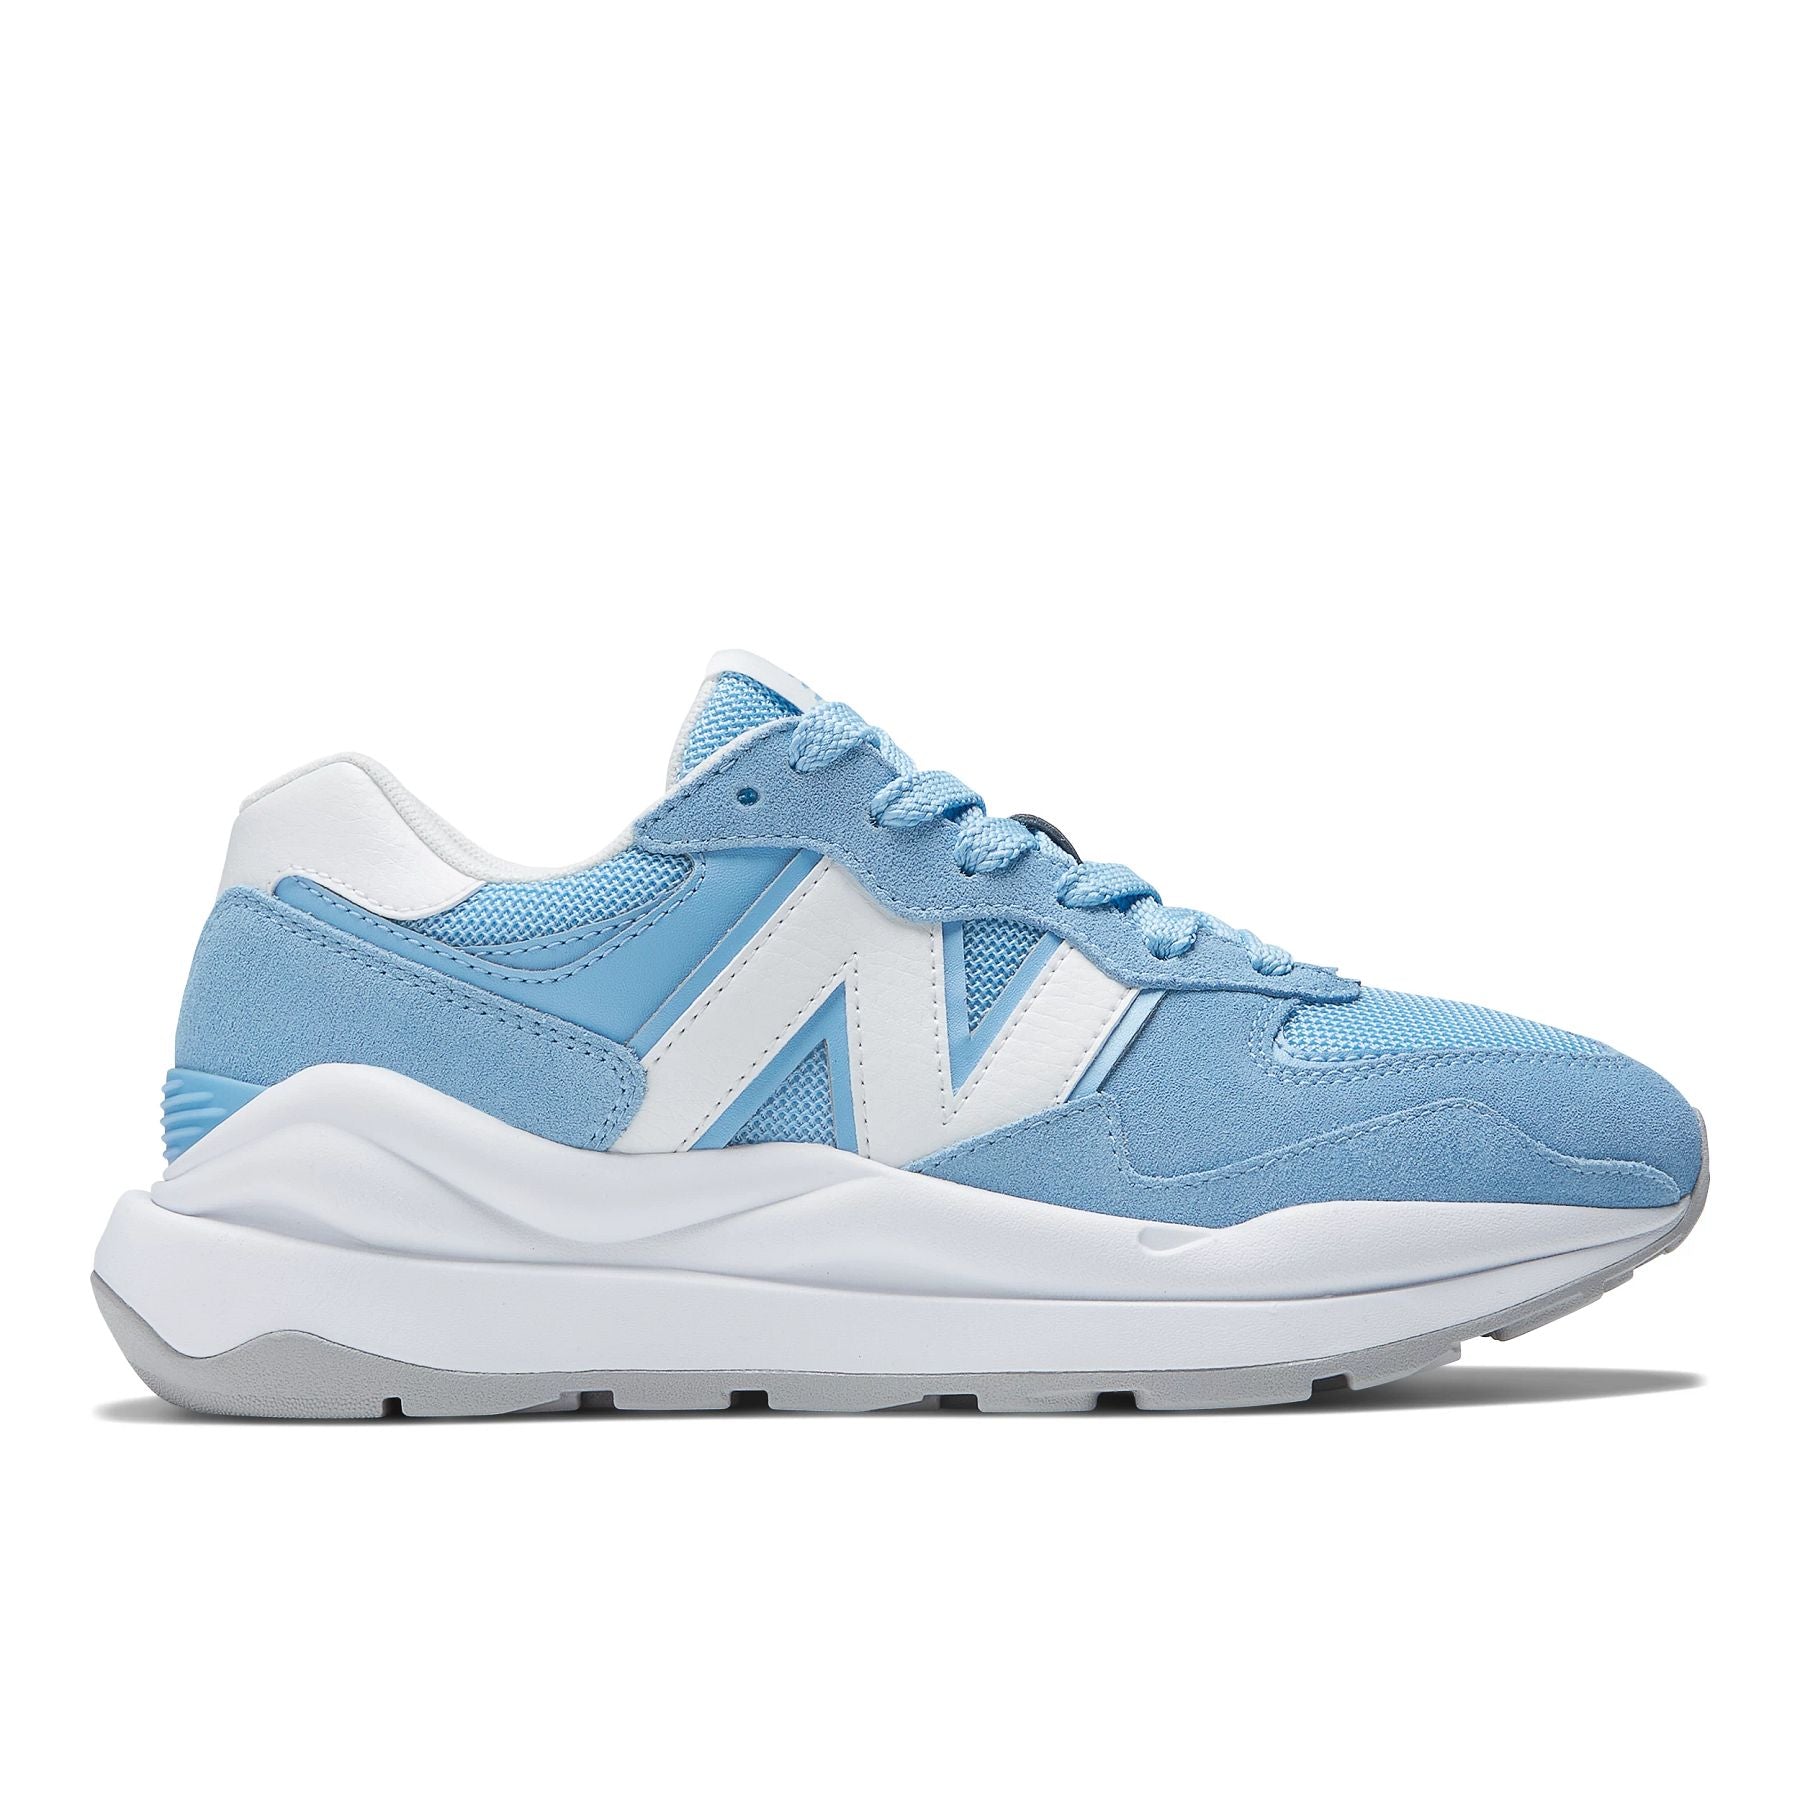 Lateral view of the Women's New Balance 5740 lifestyle shoe in the color Blue Haze